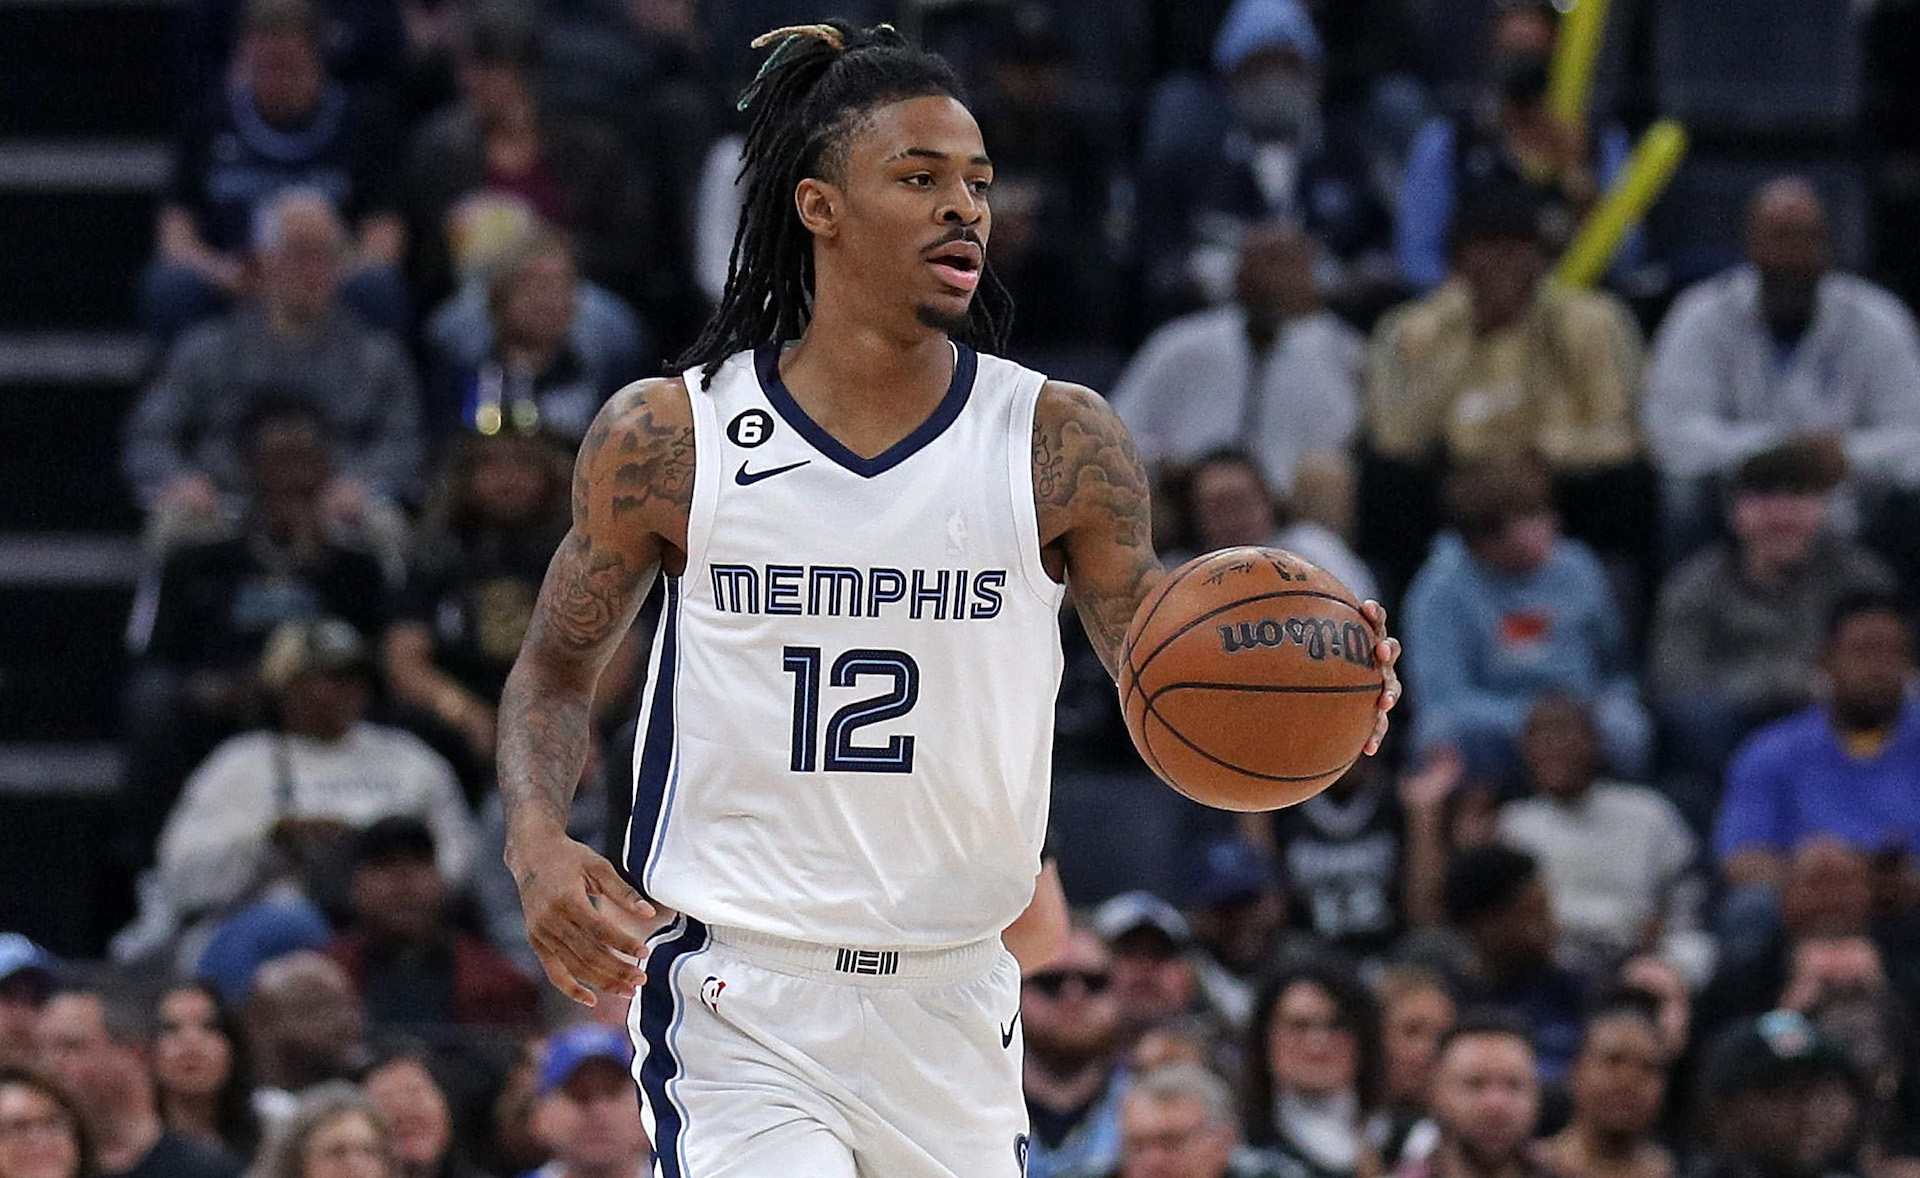 Ja Morant says he'll get help after video shows apparent gun - The